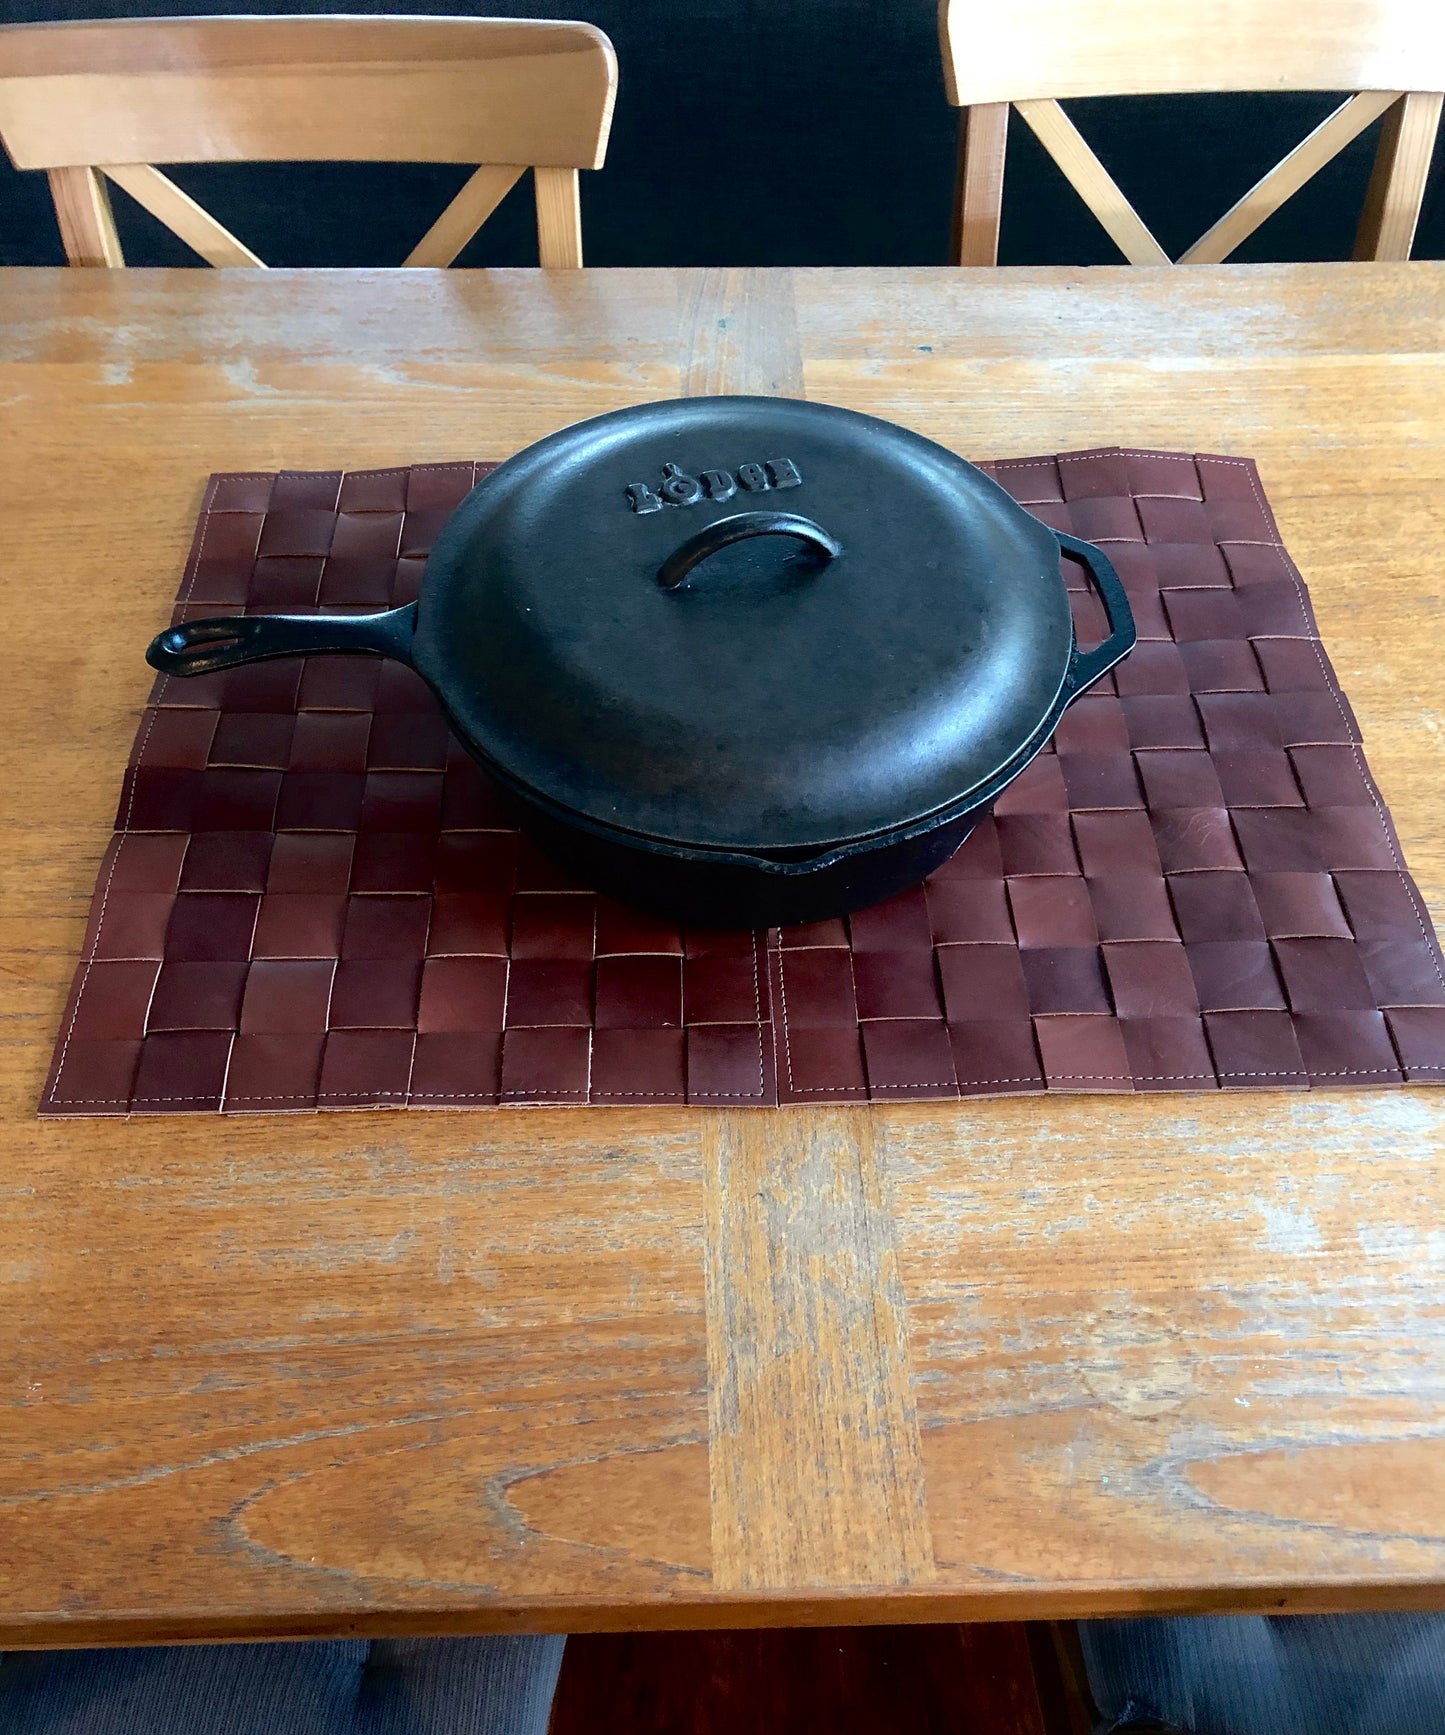 Cast iron skillet rests on woven leather mat.